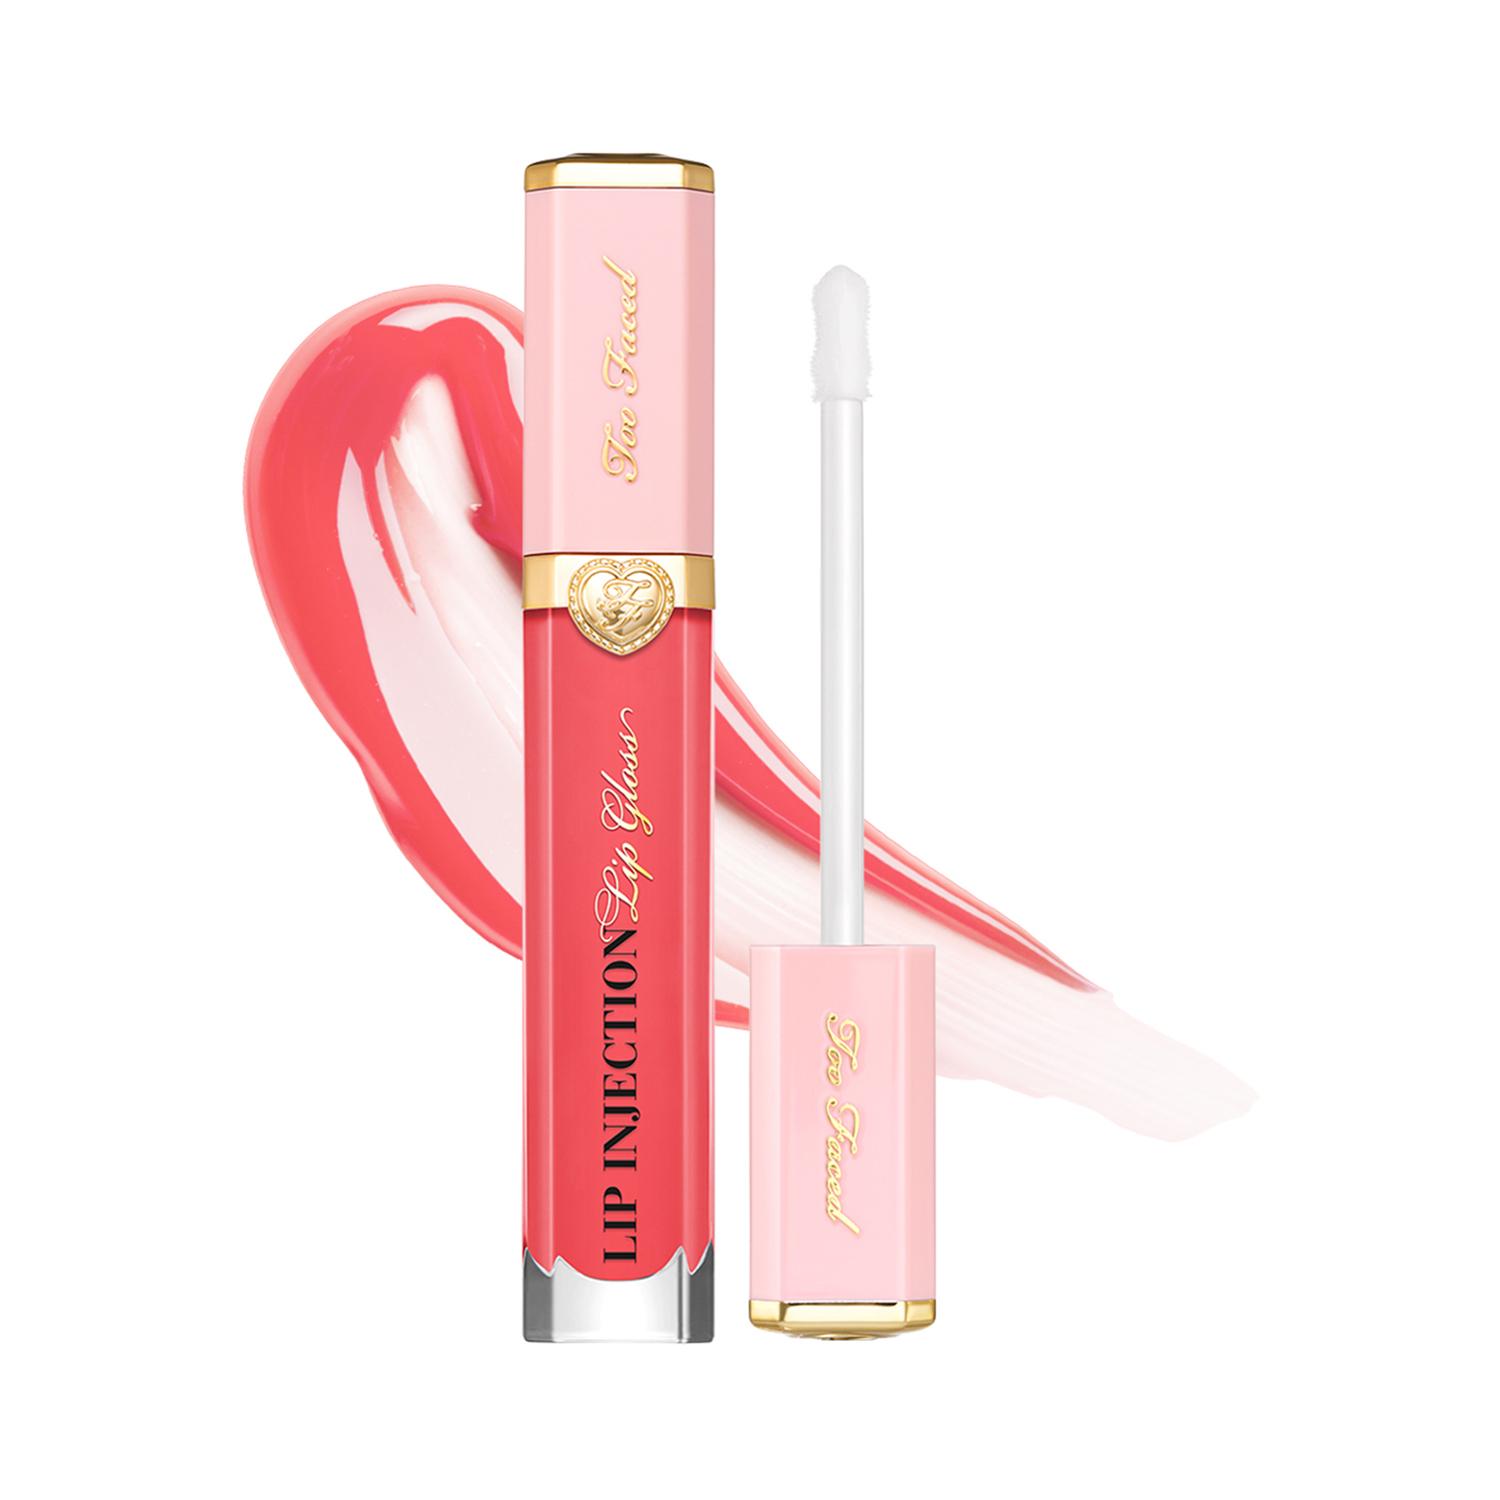 Too Faced | Too Faced Lip Injection Power Plumping Lip Gloss - On Blast (7ml)